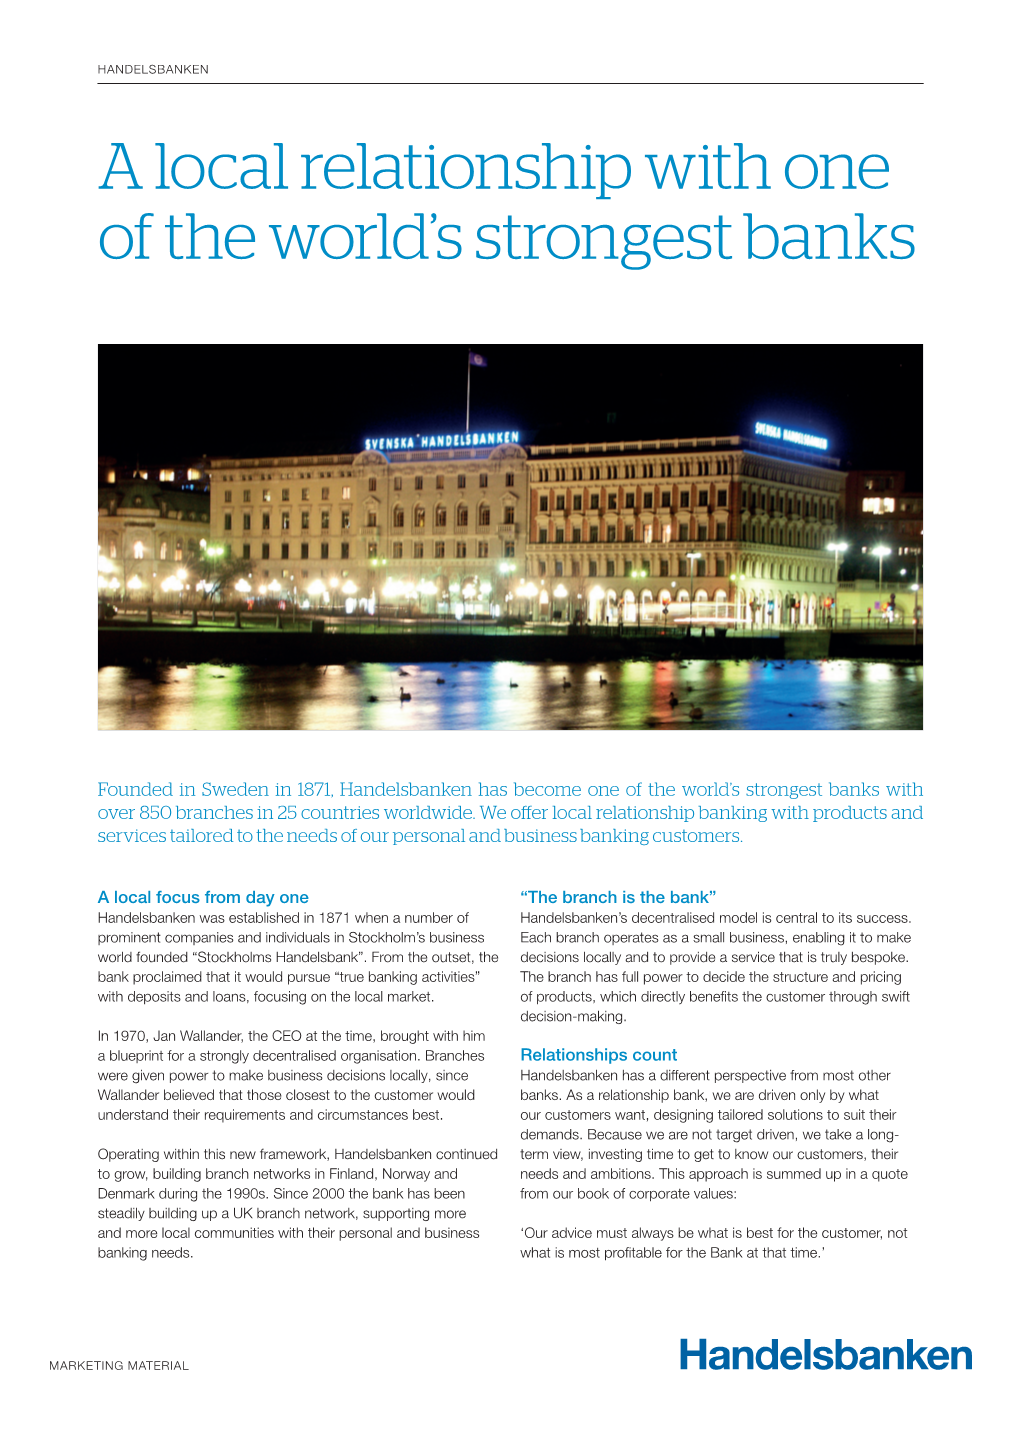 A Local Relationship with One of the World's Strongest Banks